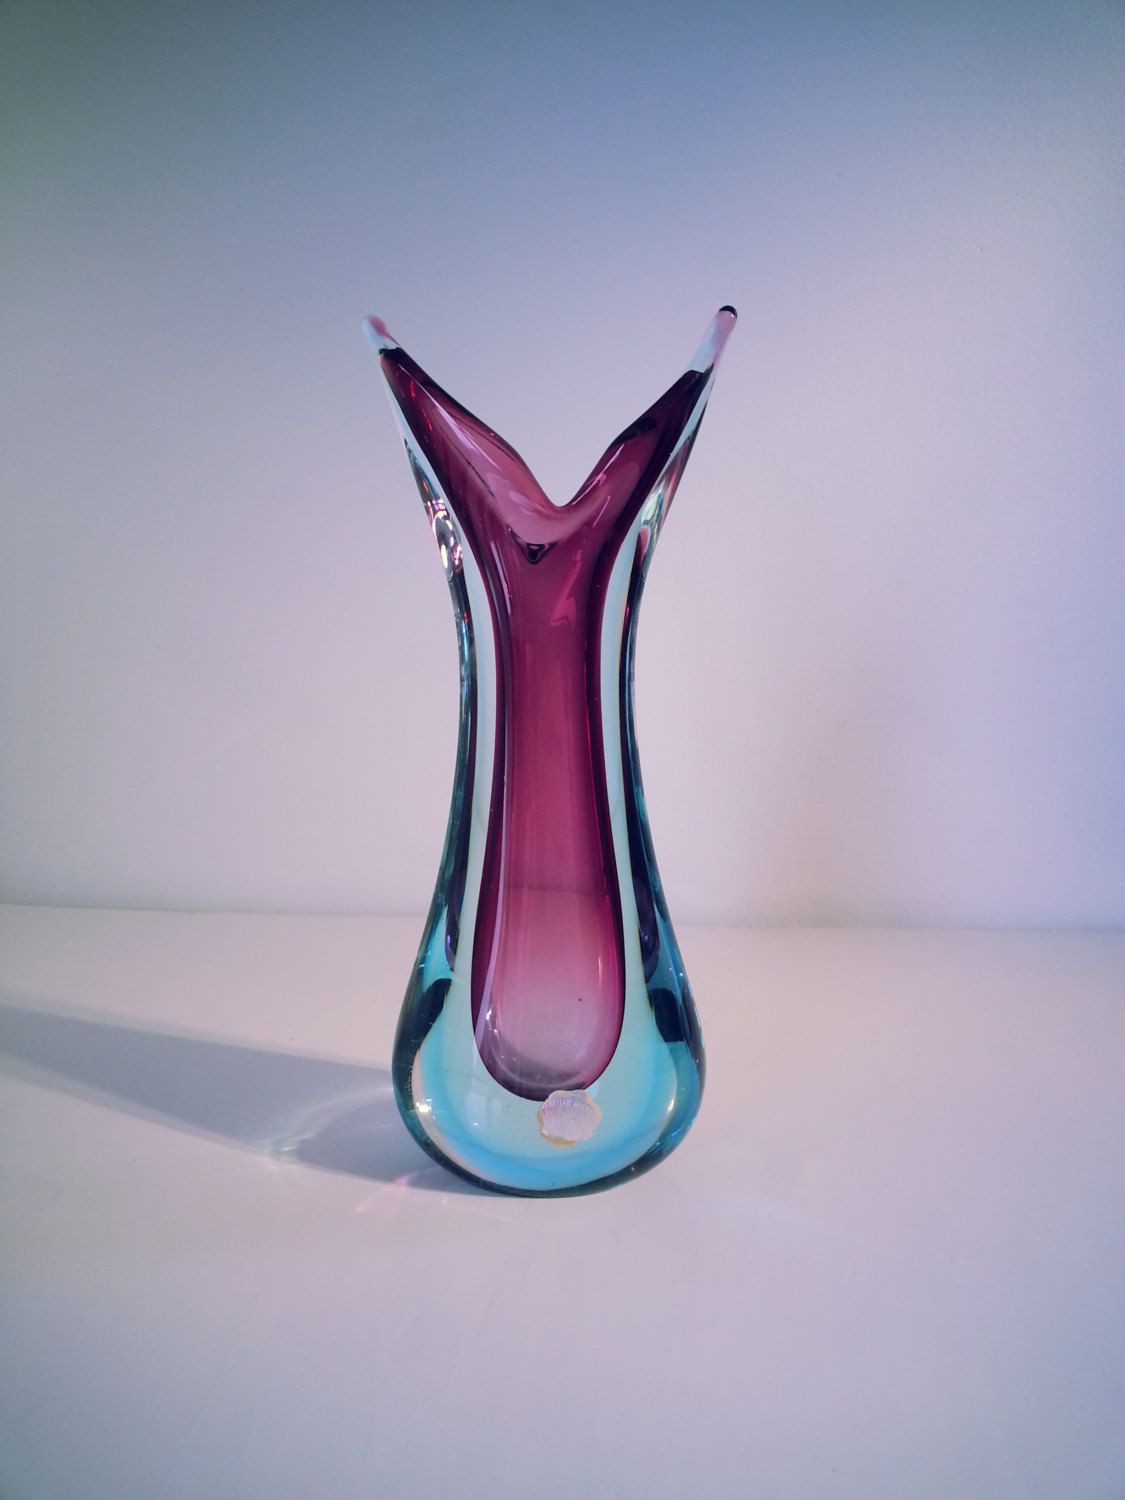 18 attractive Small Antique Glass Vases 2024 free download small antique glass vases of murano sommerso genuine venetian glass 1950s 1960s purple blue with murano sommerso genuine venetian glass 1950s 1960s purple blue glass vase pulled design vase 